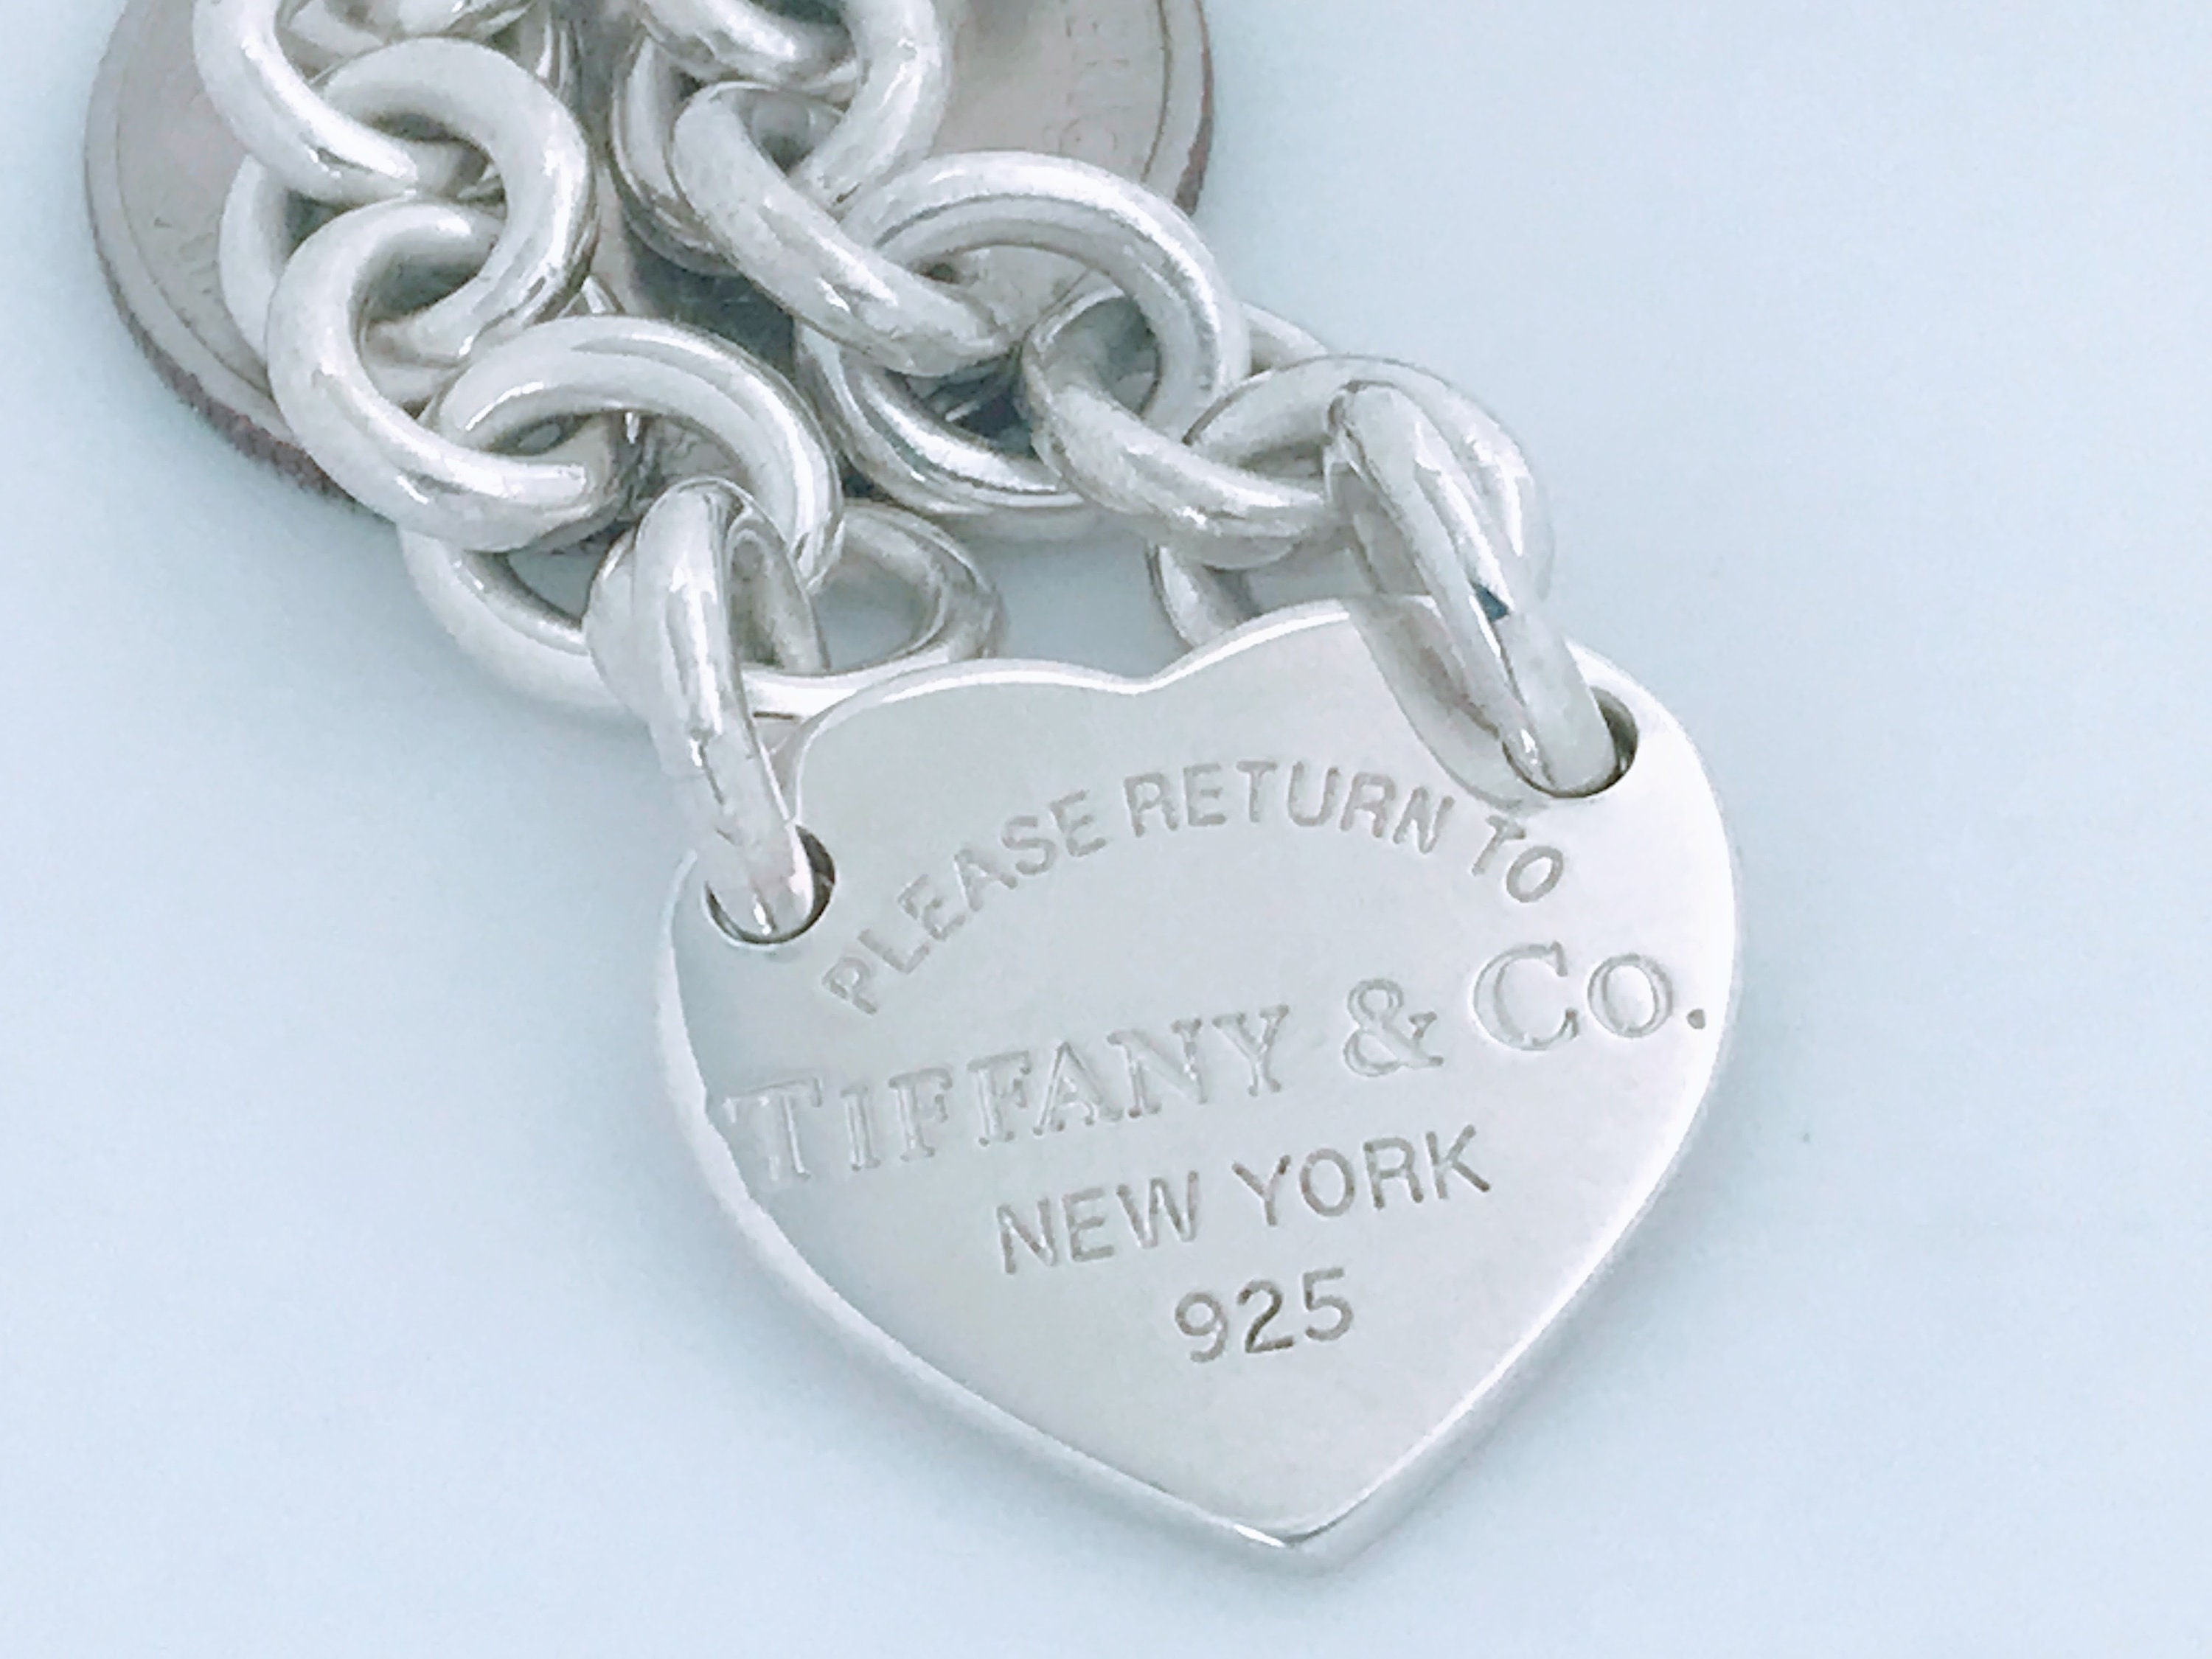 Authentic Tiffany & Co Sterling Silver Heart Tag Charm Bracelet